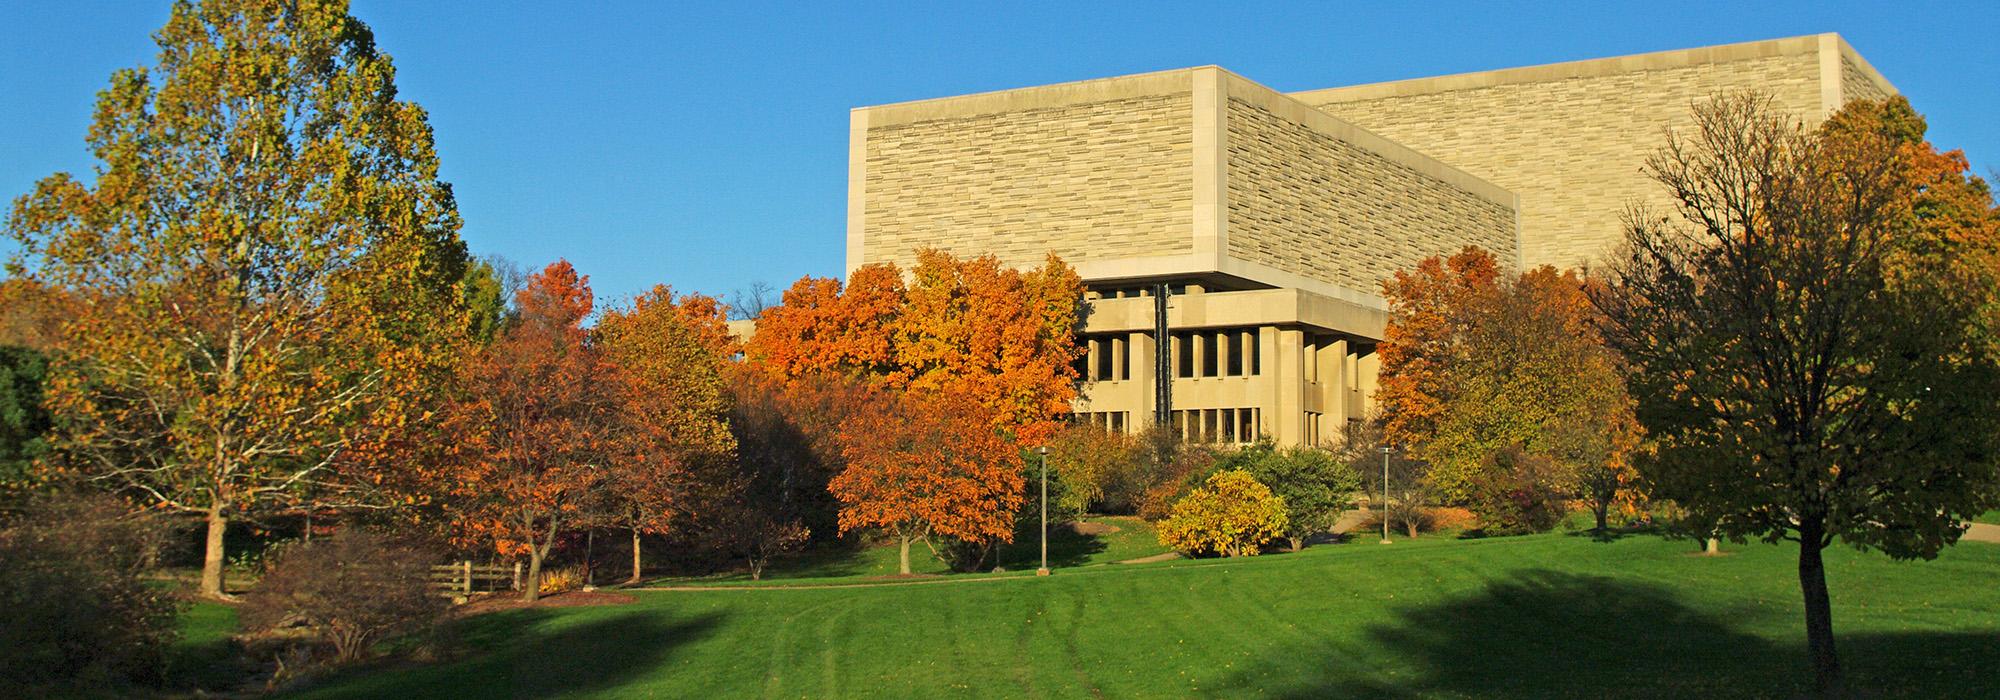 Indiana University Bloomington: America's Legacy Campus by J